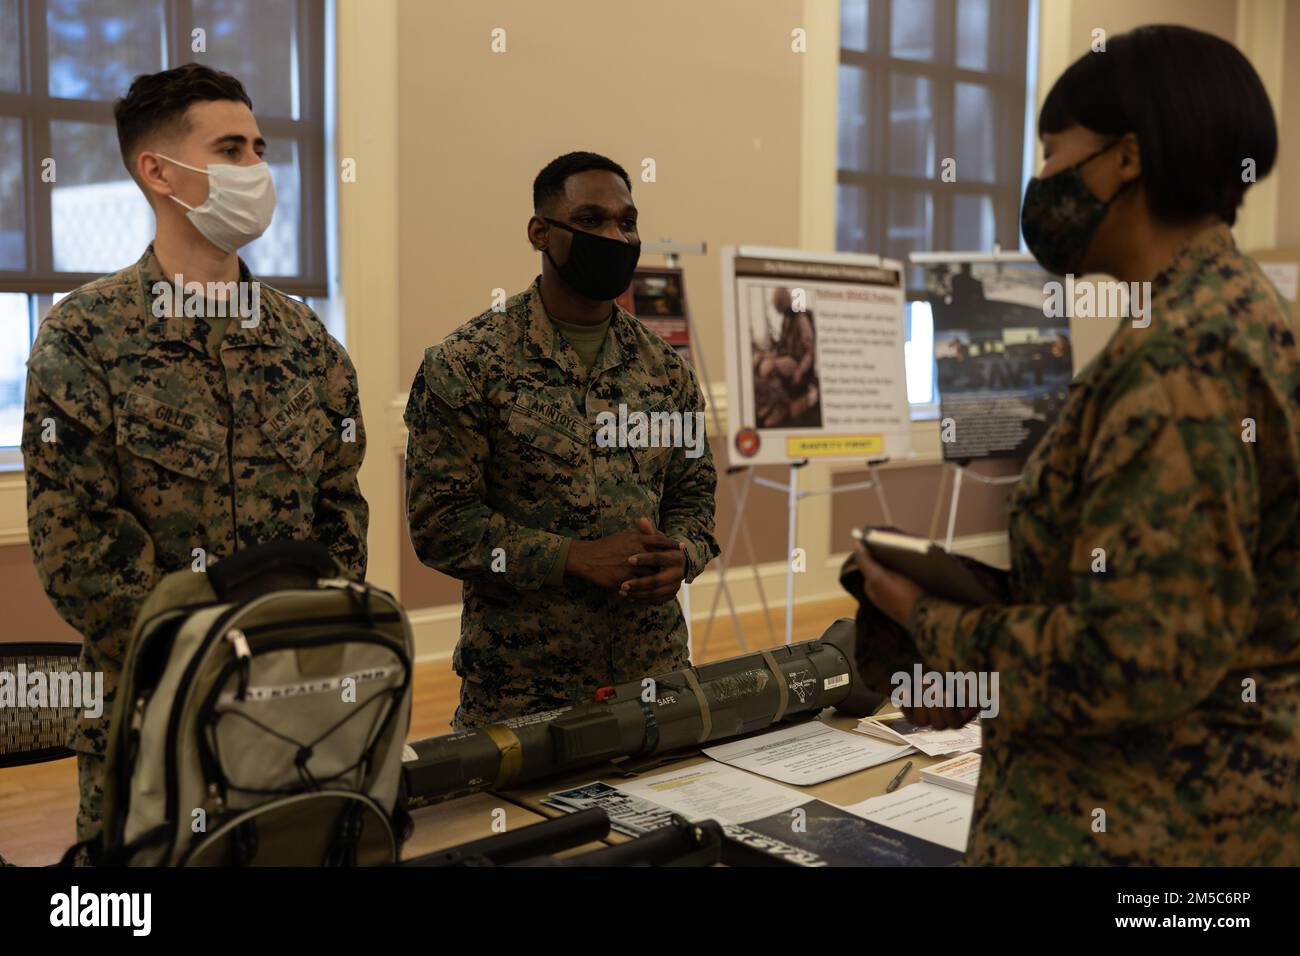 U.S Marine Corps Cpl. Richard Gillis, left, and Cpl. Olorunfemi Akintoye, both assistant trainers at the sim center, Marine Corps Base Camp Lejeune, speak with Lt. Col. NaTasha Everly, commanding officer of weapons training battalion, Stone Bay, Marine Corps Base Camp Lejeune (MCB Camp Lejeune) during the warfighter training symposium event at Marston Pavilion, MCB Camp Lejeune, North Carolina, Feb. 28, 2022. The warfighter training symposium educated unit leaders across MCB Camp Lejeune on range modernization efforts, development of new ranges and highlighted other training opportunities and Stock Photo